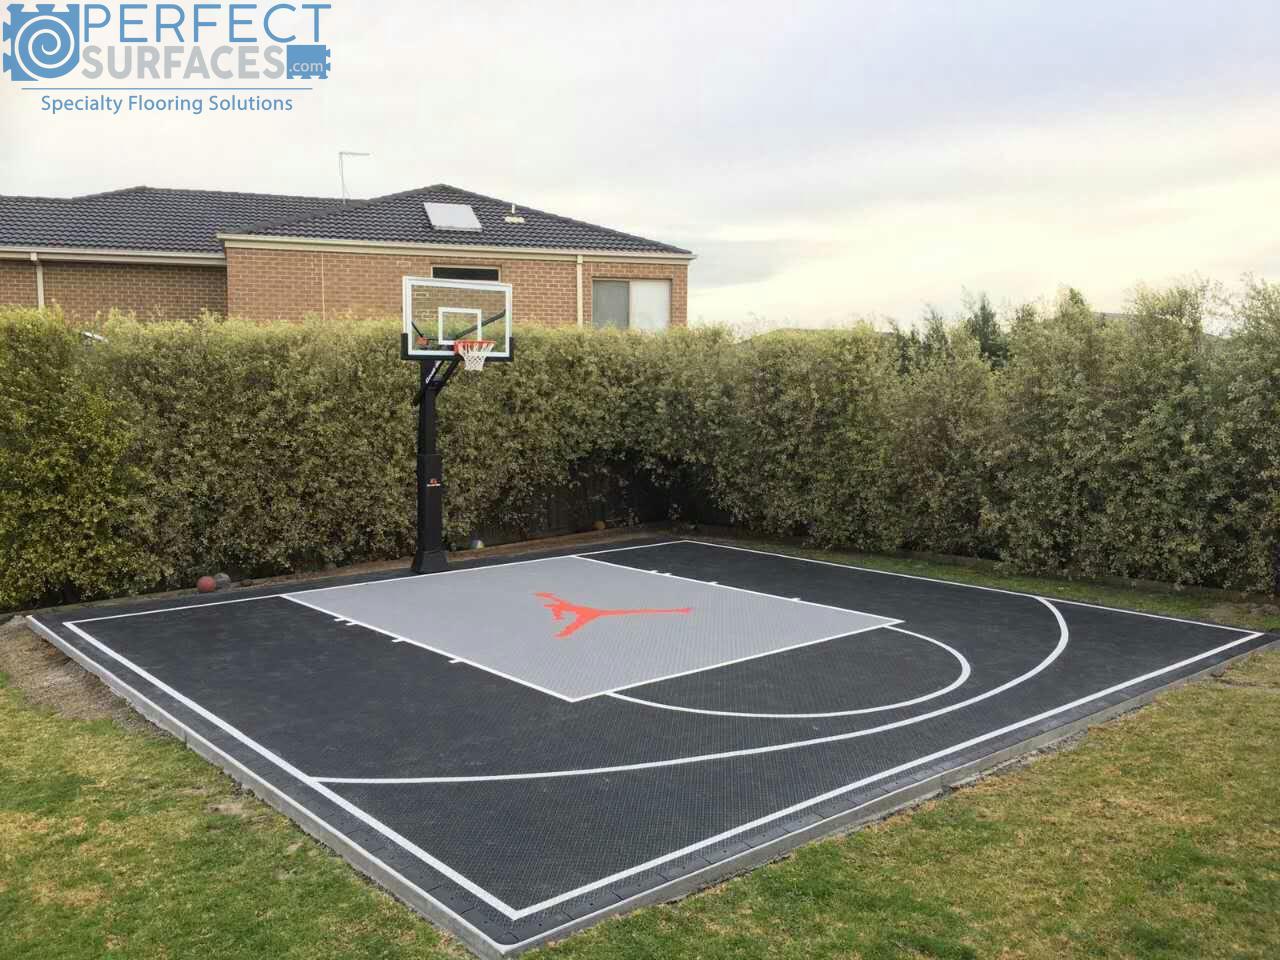 Snapgrid Lx Sport Tiles Perfect, Sports Court Tiles